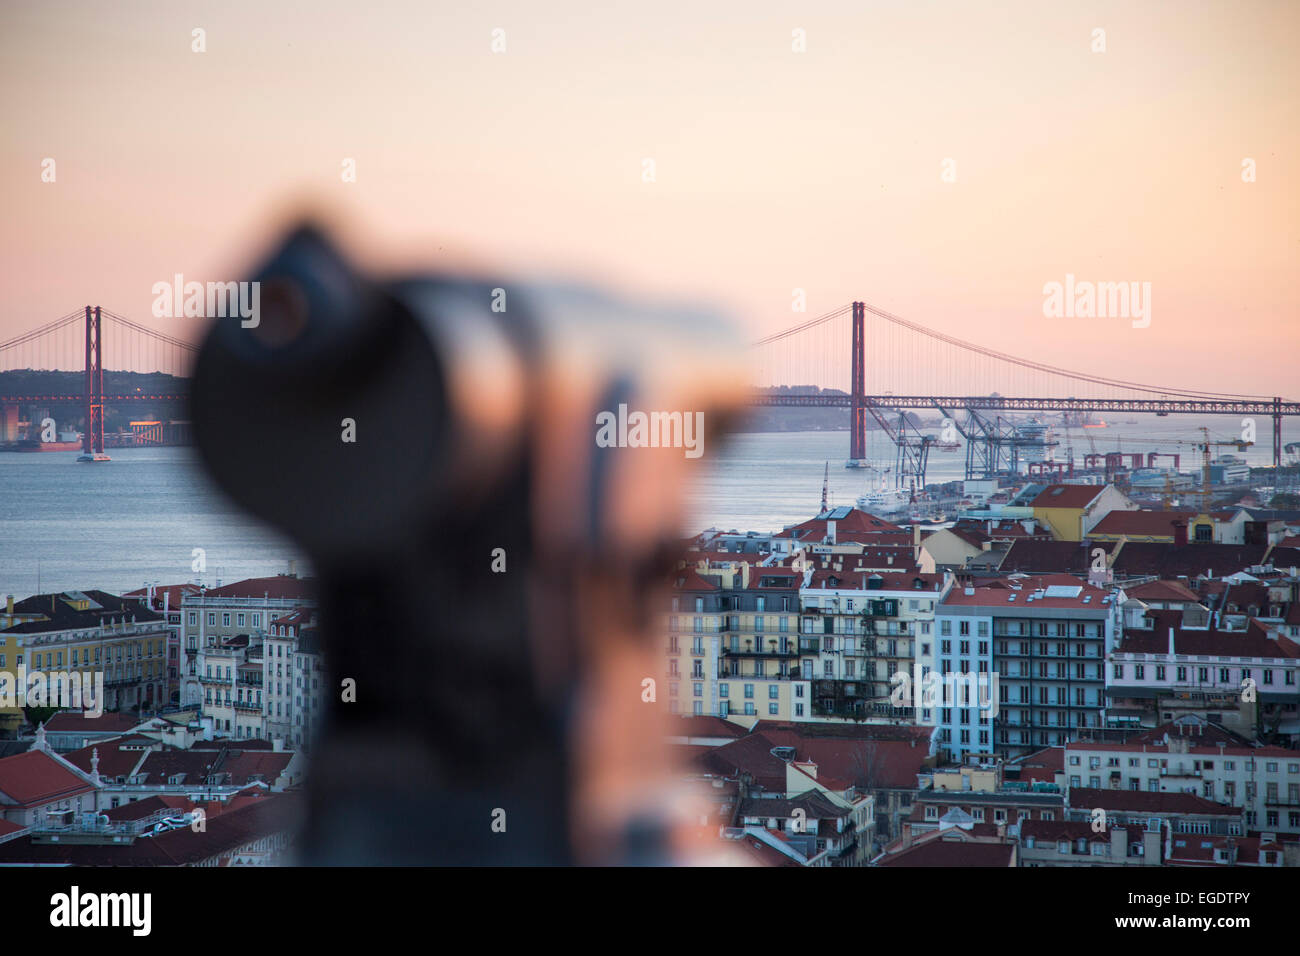 Coin-operated telescope at Castelo de San Jorge, St. George's Castle, in the Alfama district with view over the city and Ponte 25 de Abril bridge over Tagus river at sunset, Lisbon, Lisboa, Portugal Stock Photo